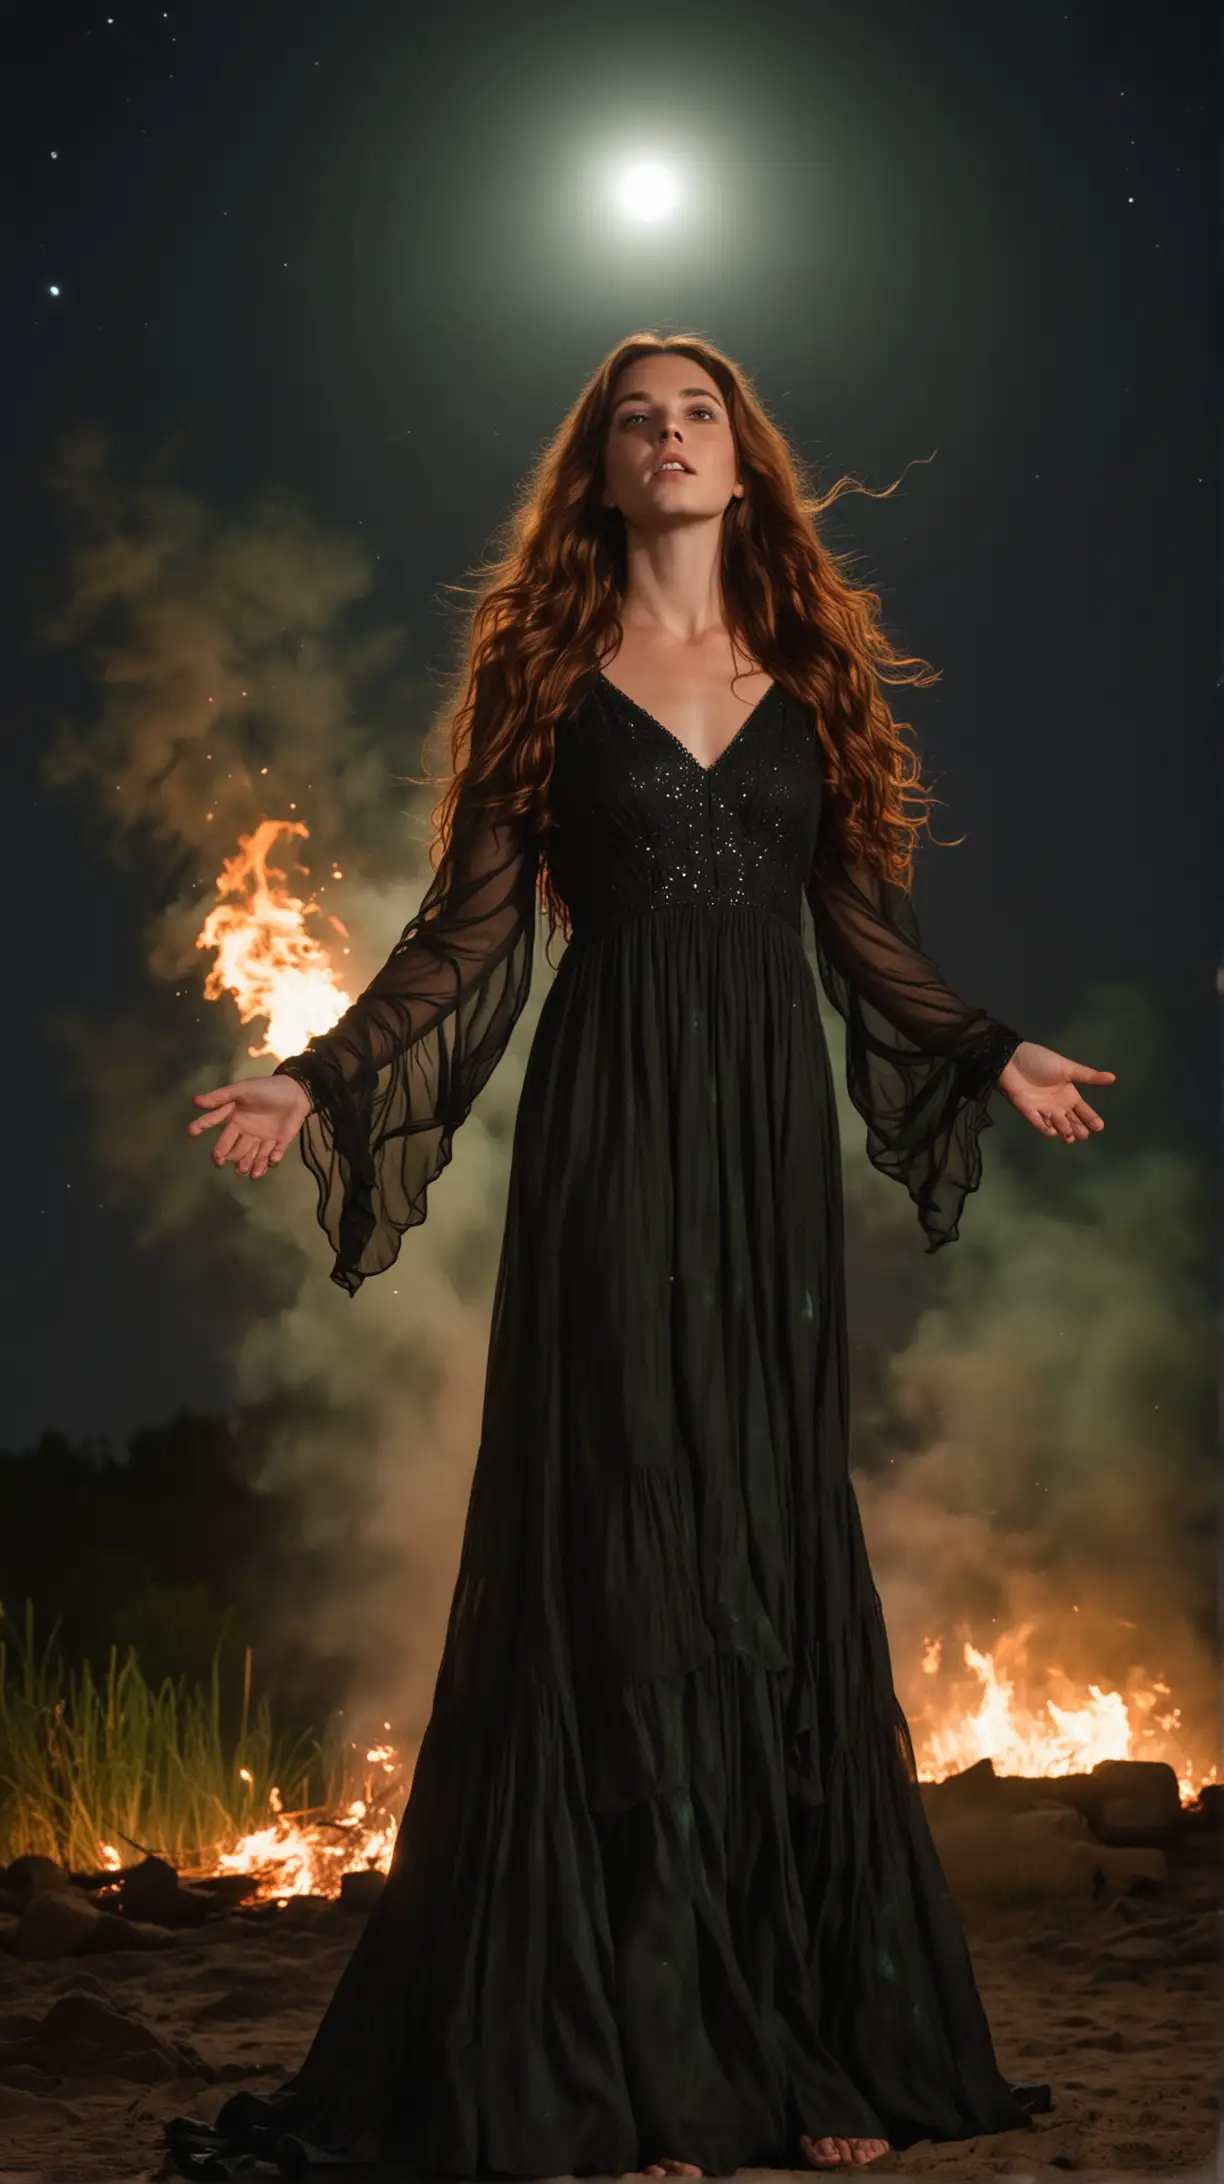 Young Woman Embracing Flames Under Moonlight